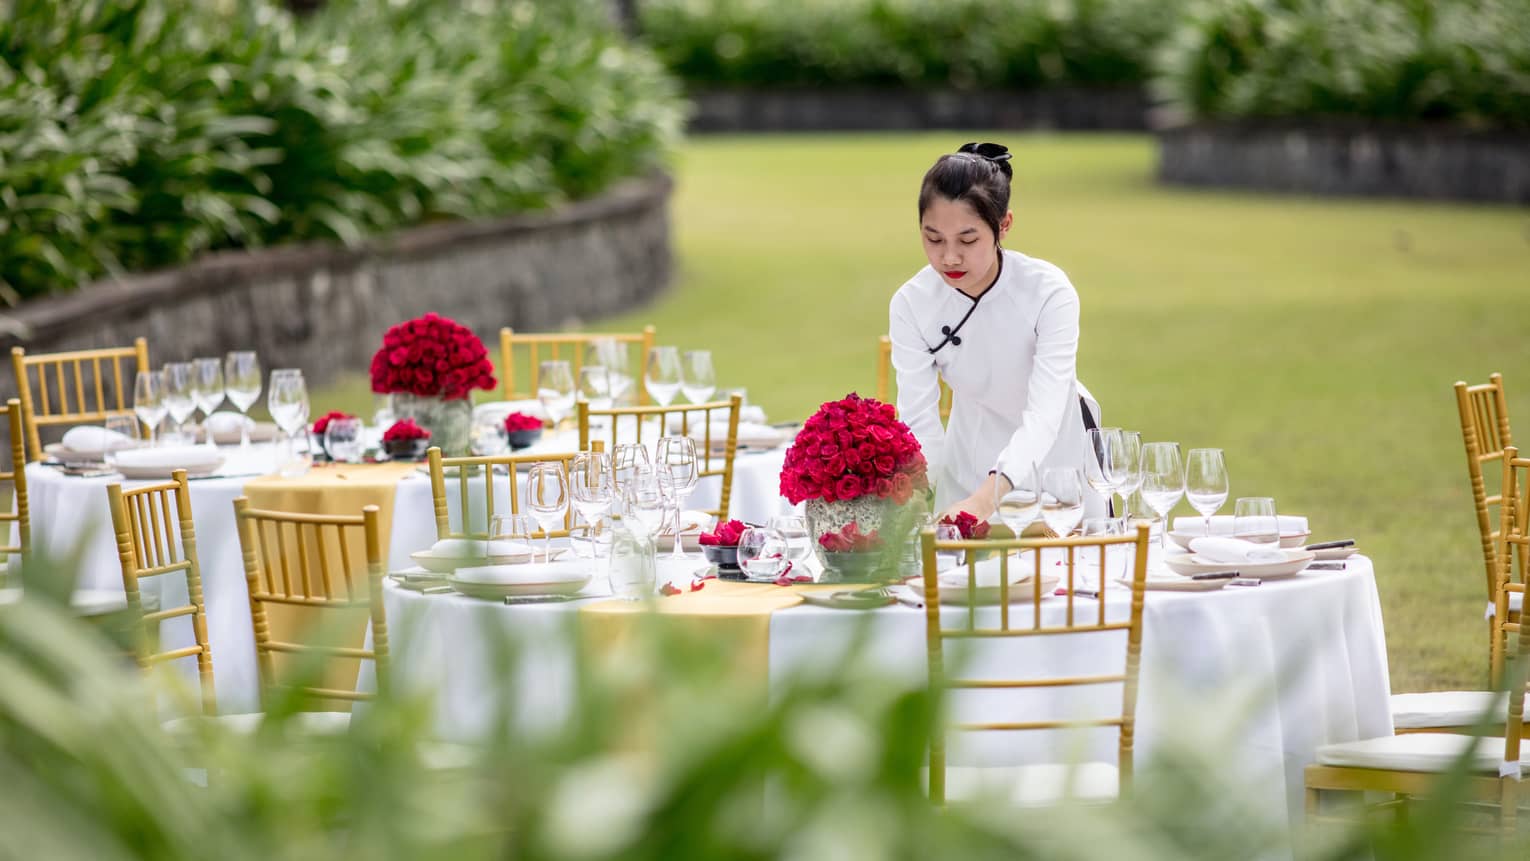 A staff member sets a table out in the lawn with red flowers for a wedding